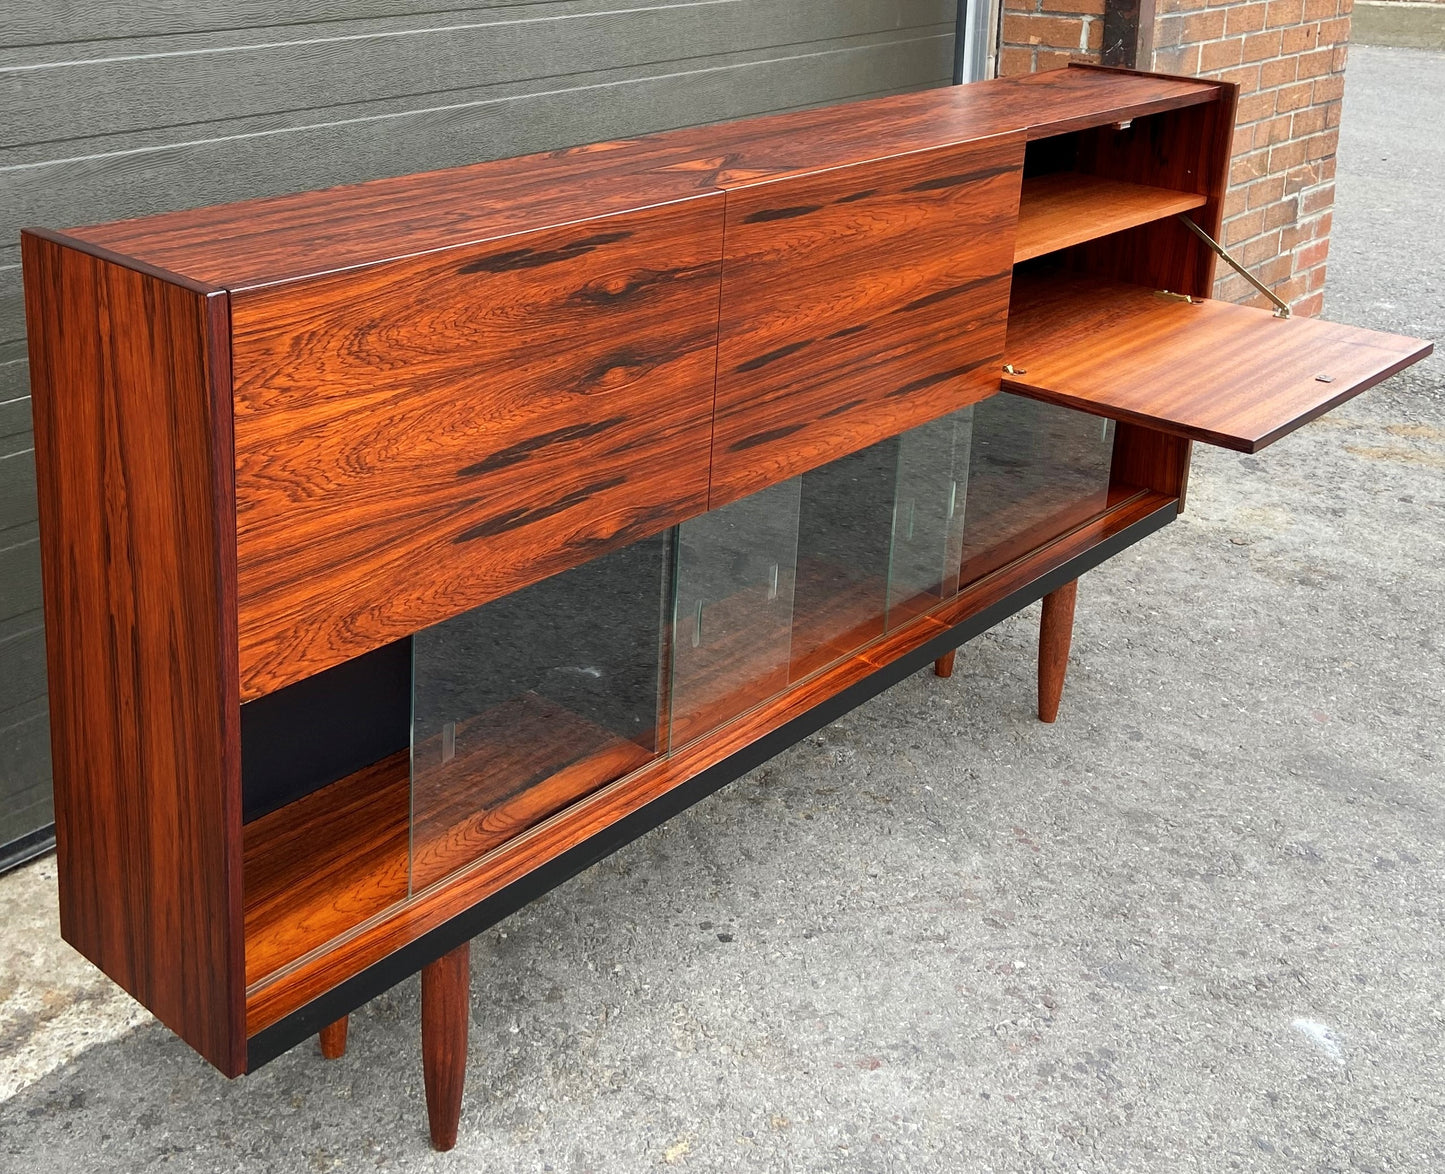 REFINISHED Mid Century Modern Cabinet w Rosewood & Glass Doors Narrow 73.5", Perfect